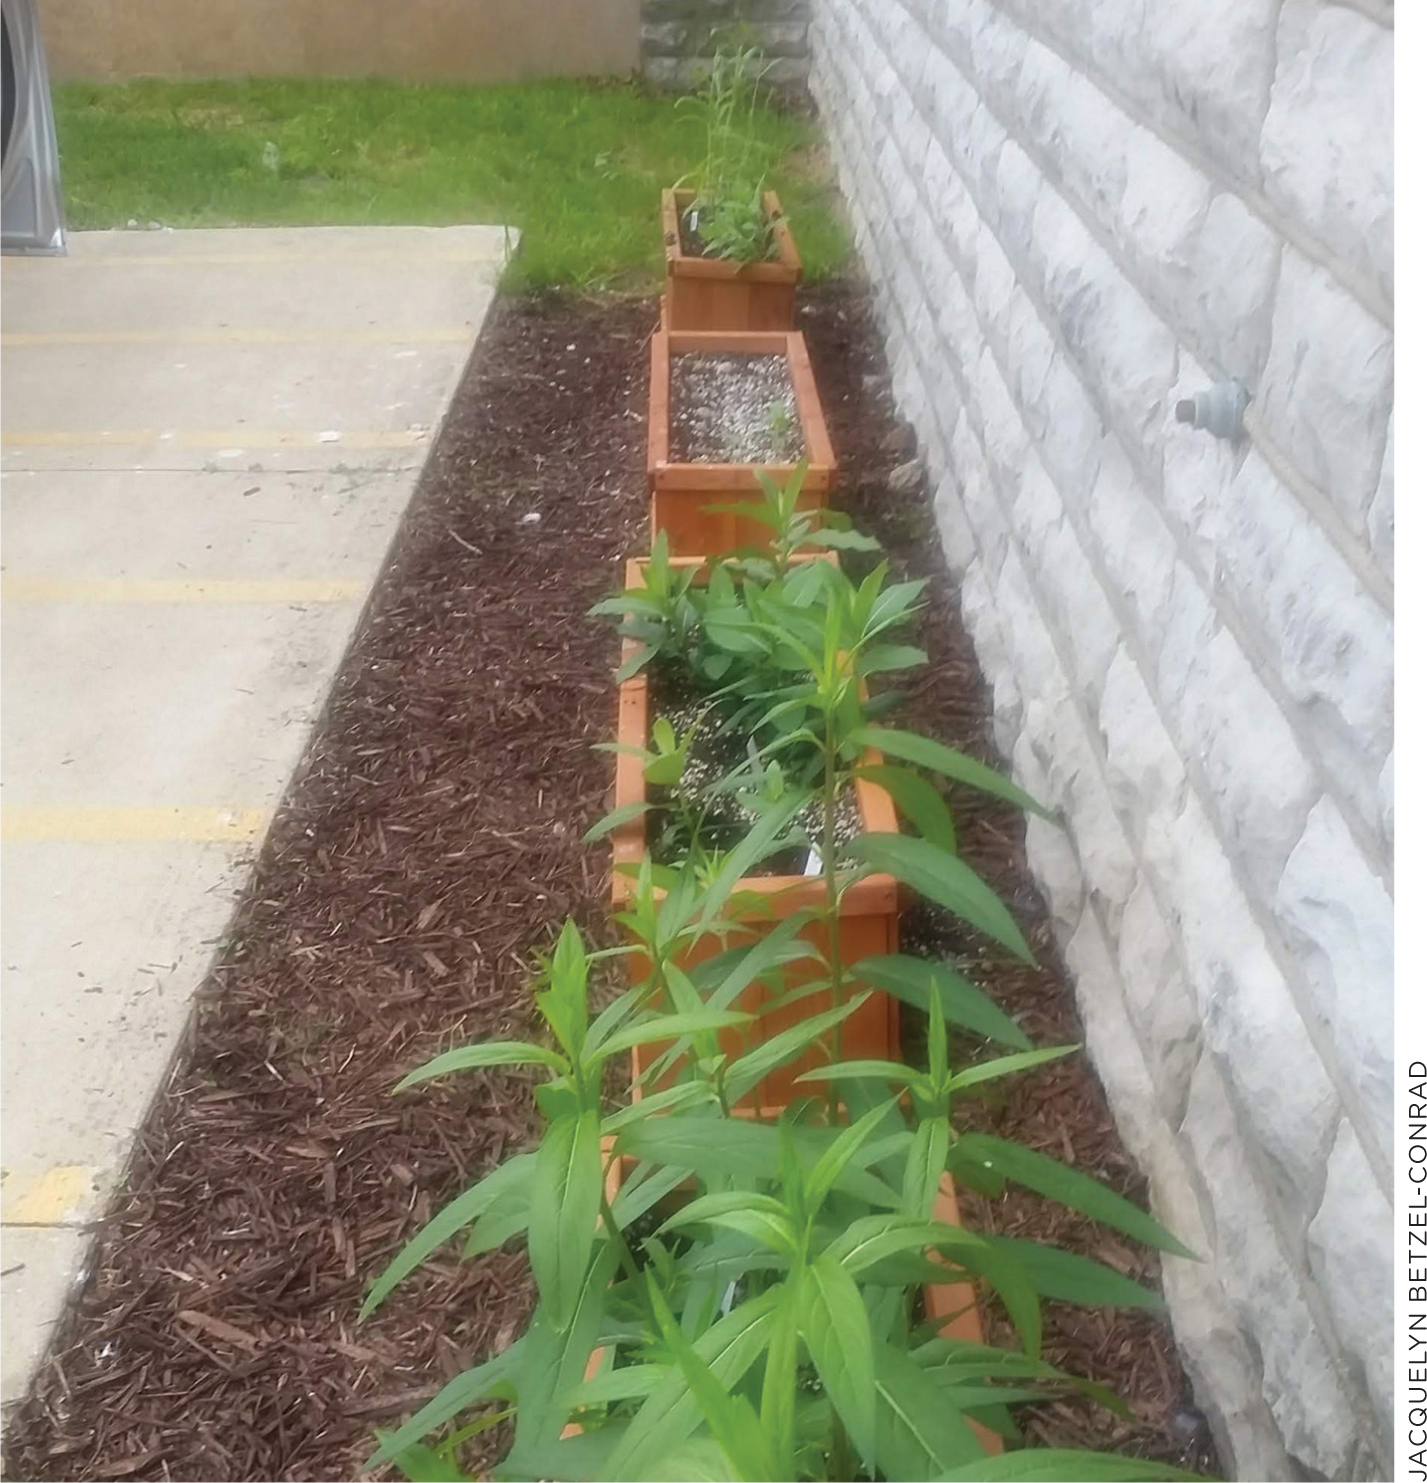 Having a pollinator garden right outside the classroom allows for more frequent data collection.